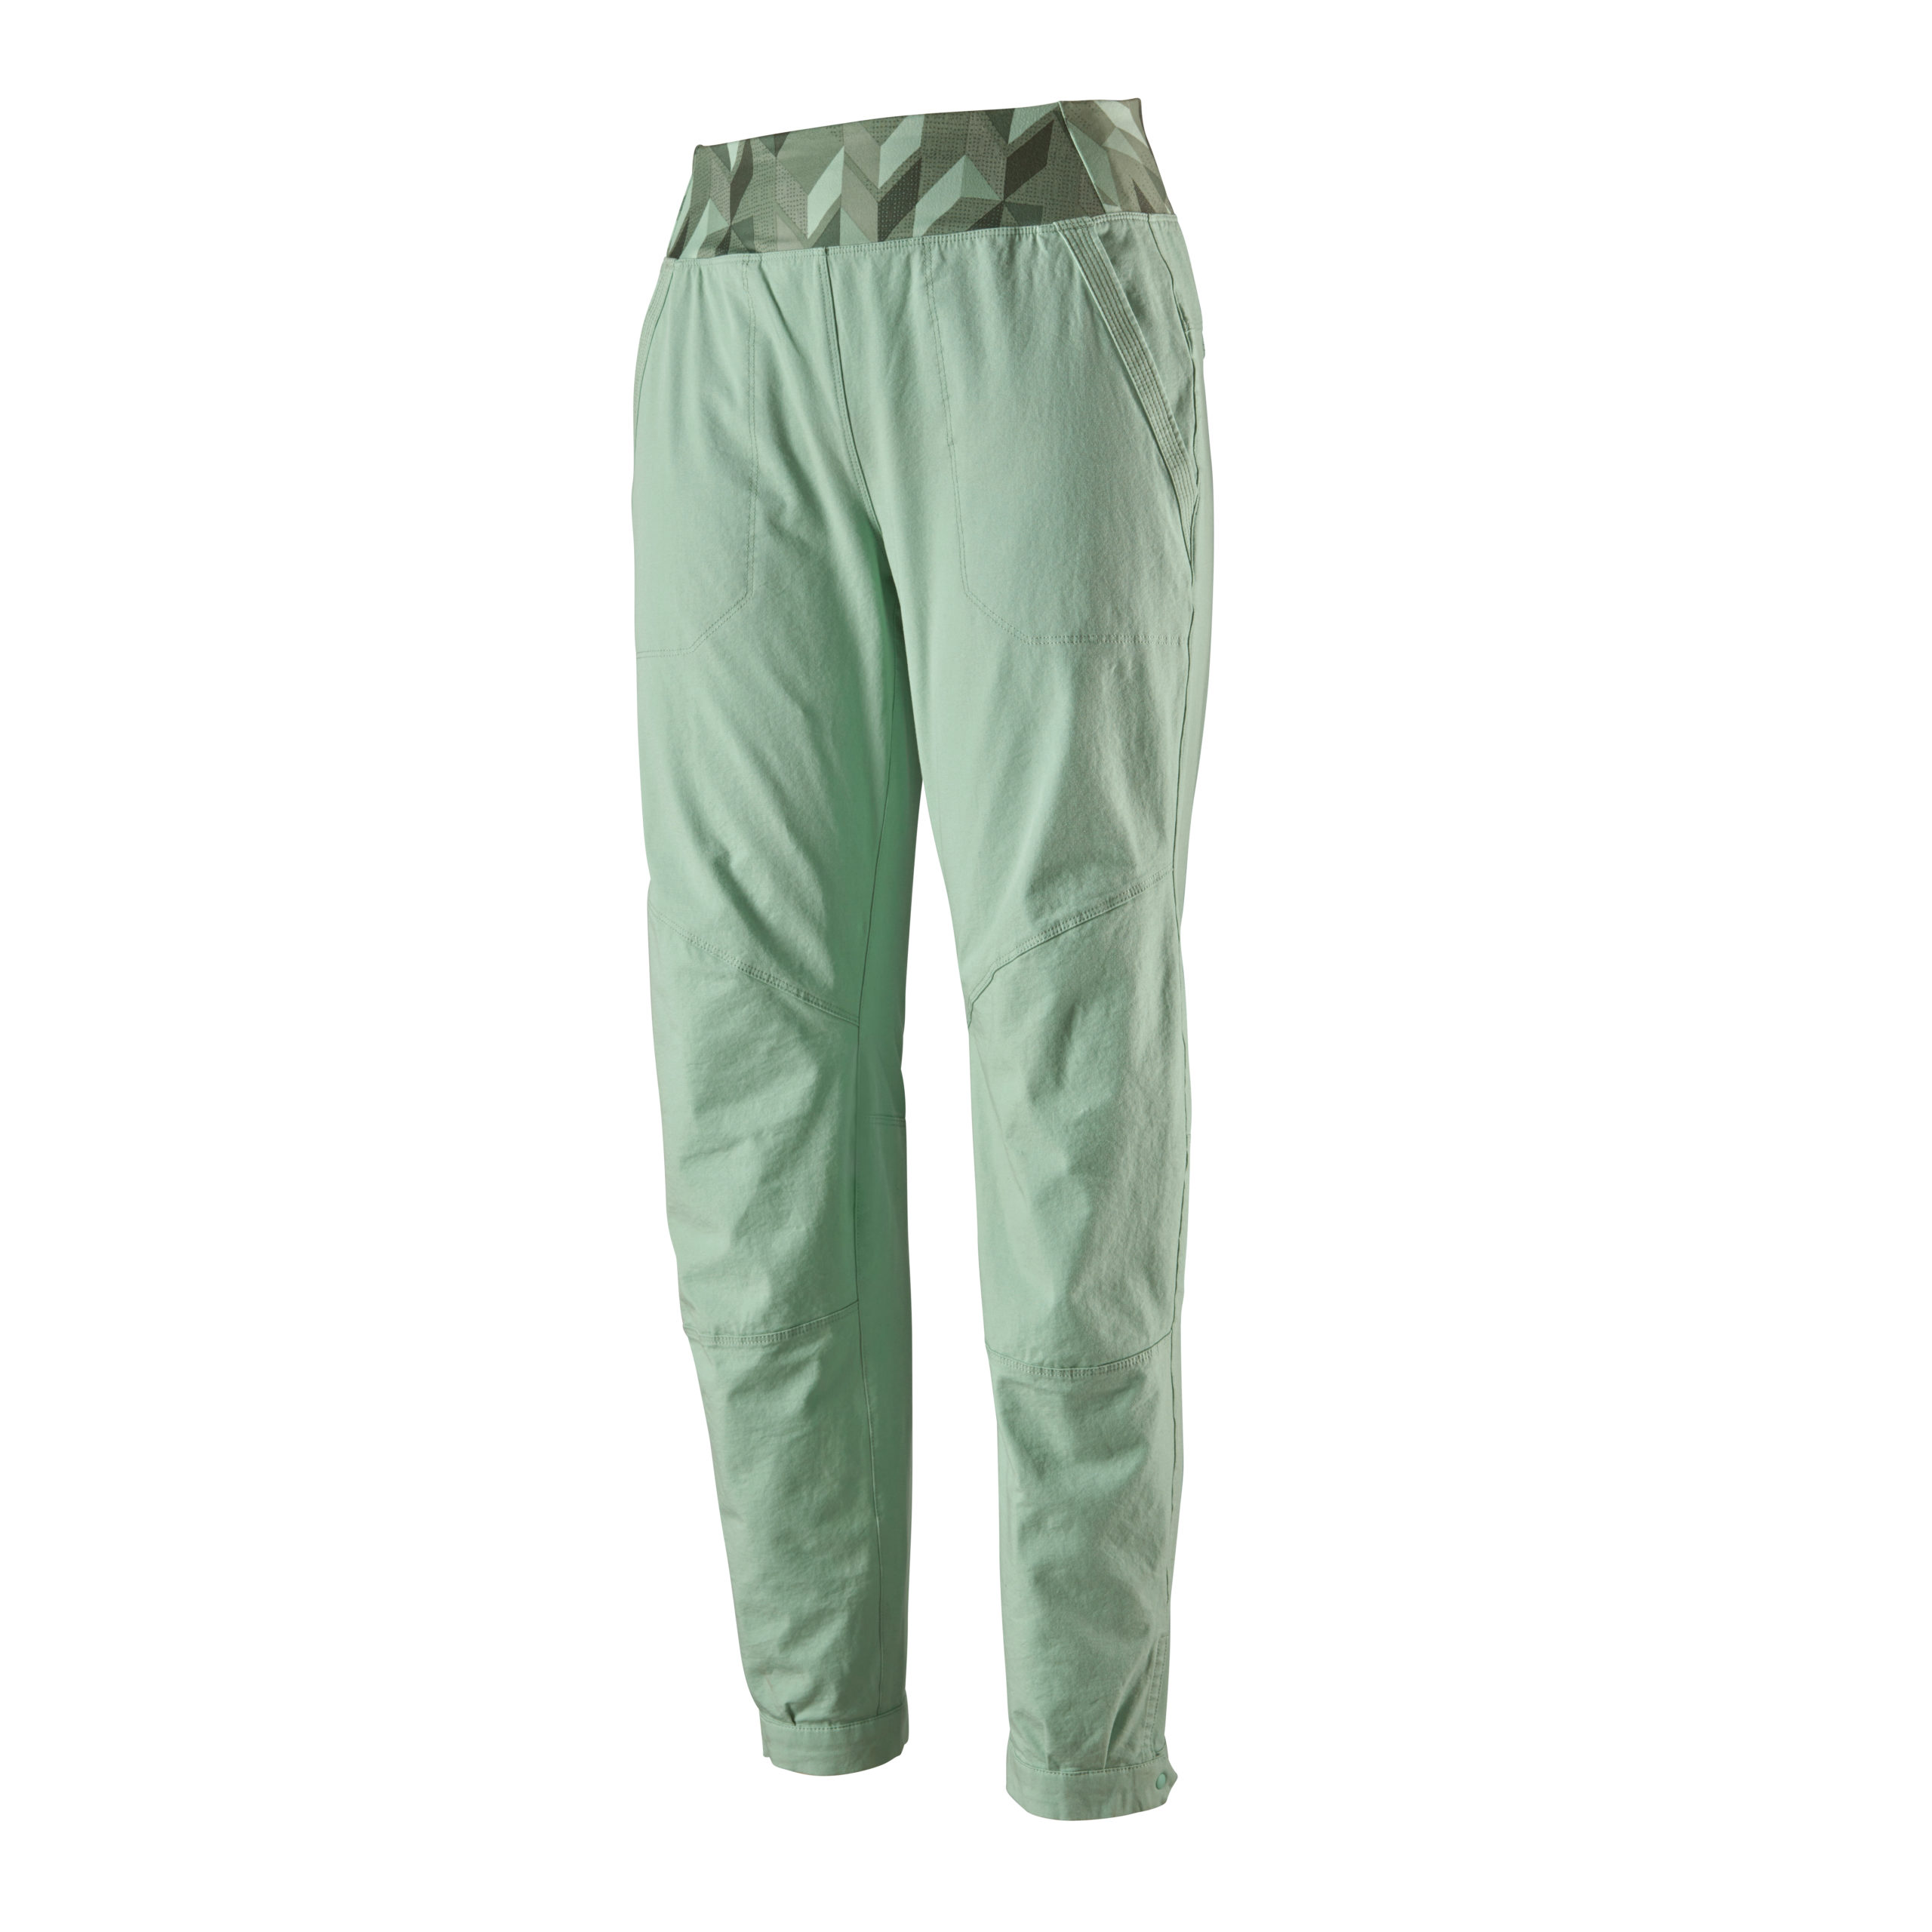 https://thepilloutdoor.com/contents/wp-content/uploads/2020/05/Patagonia-Ws-Caliza-Rock-Pants-scaled.jpg